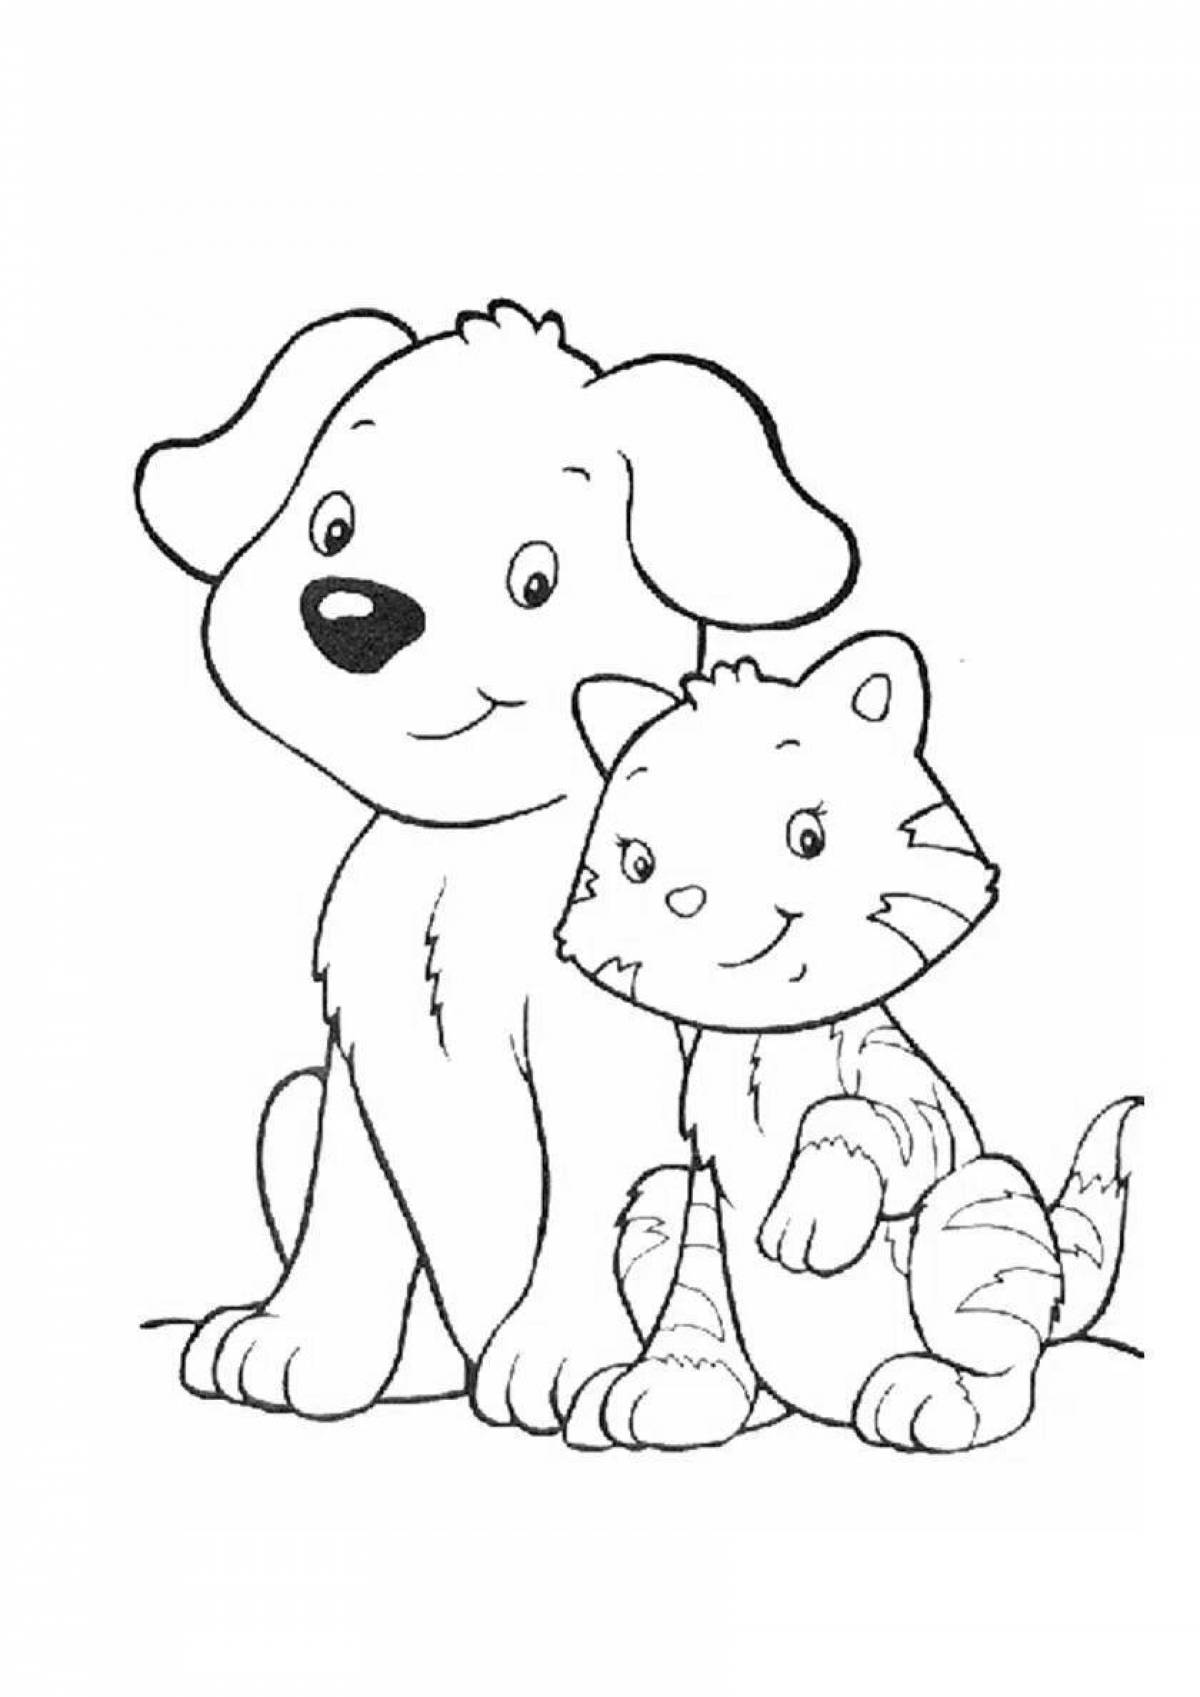 Animated pet coloring pages for kids